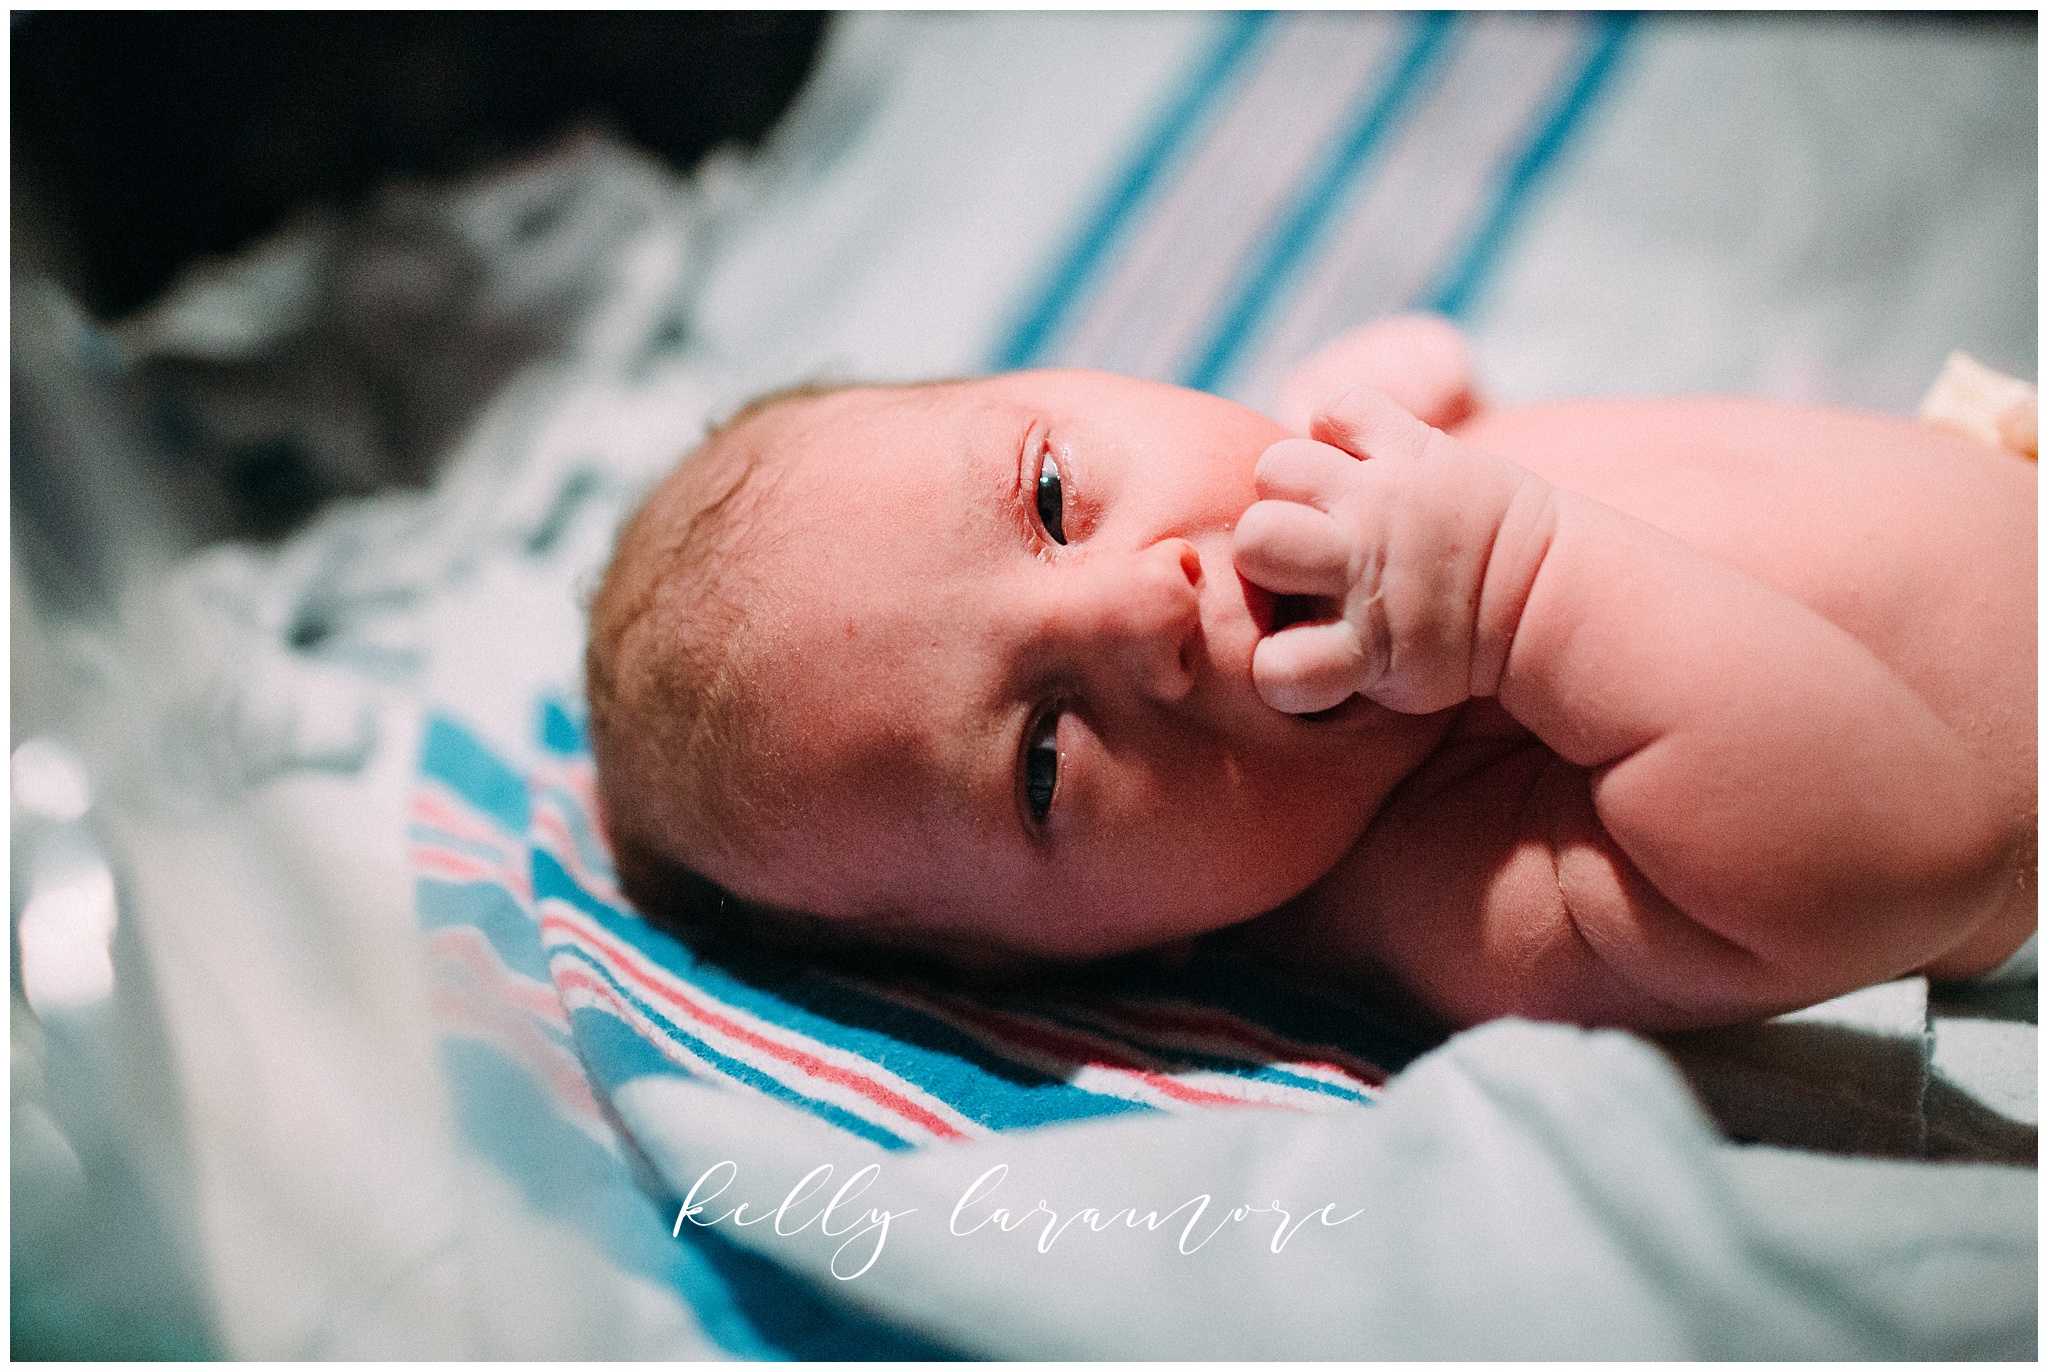 st louis birth story photographer, st louis family photographer, missouri baptist birth center birth, delivery room, baby eyes